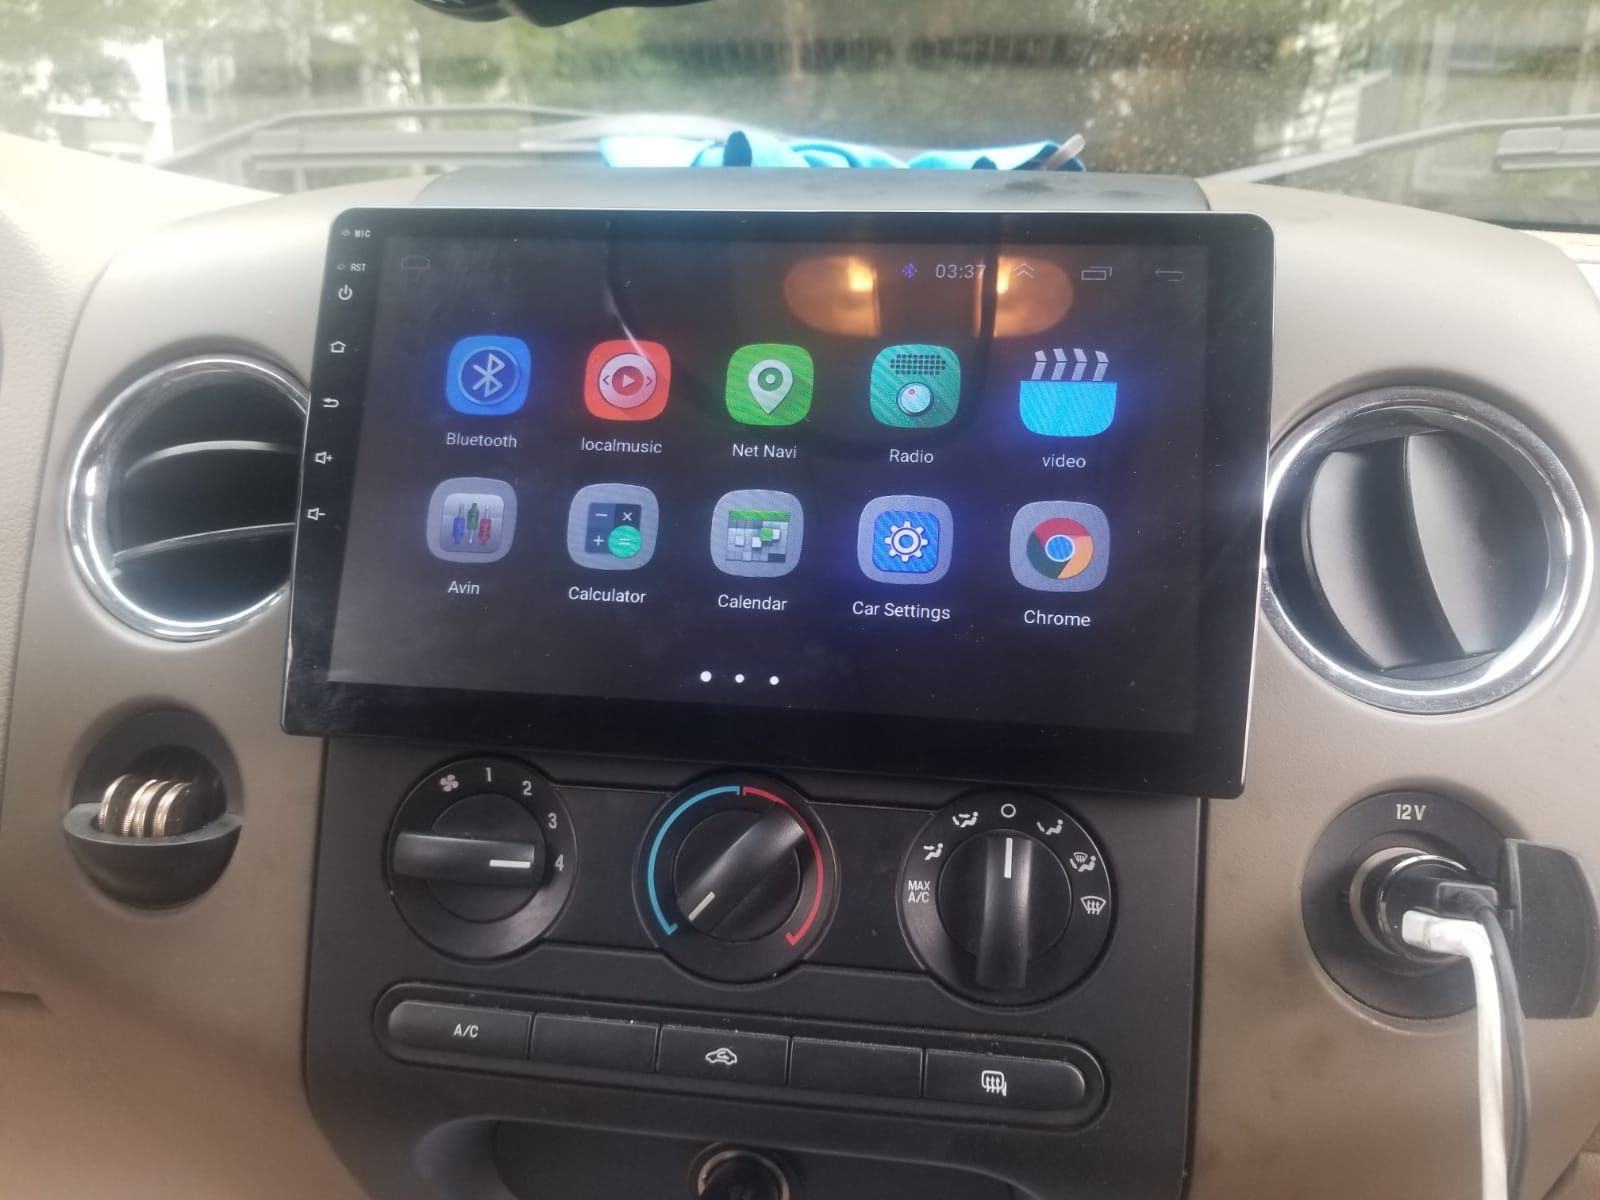 Android 10” double din (Car stereo) Navigation (New)